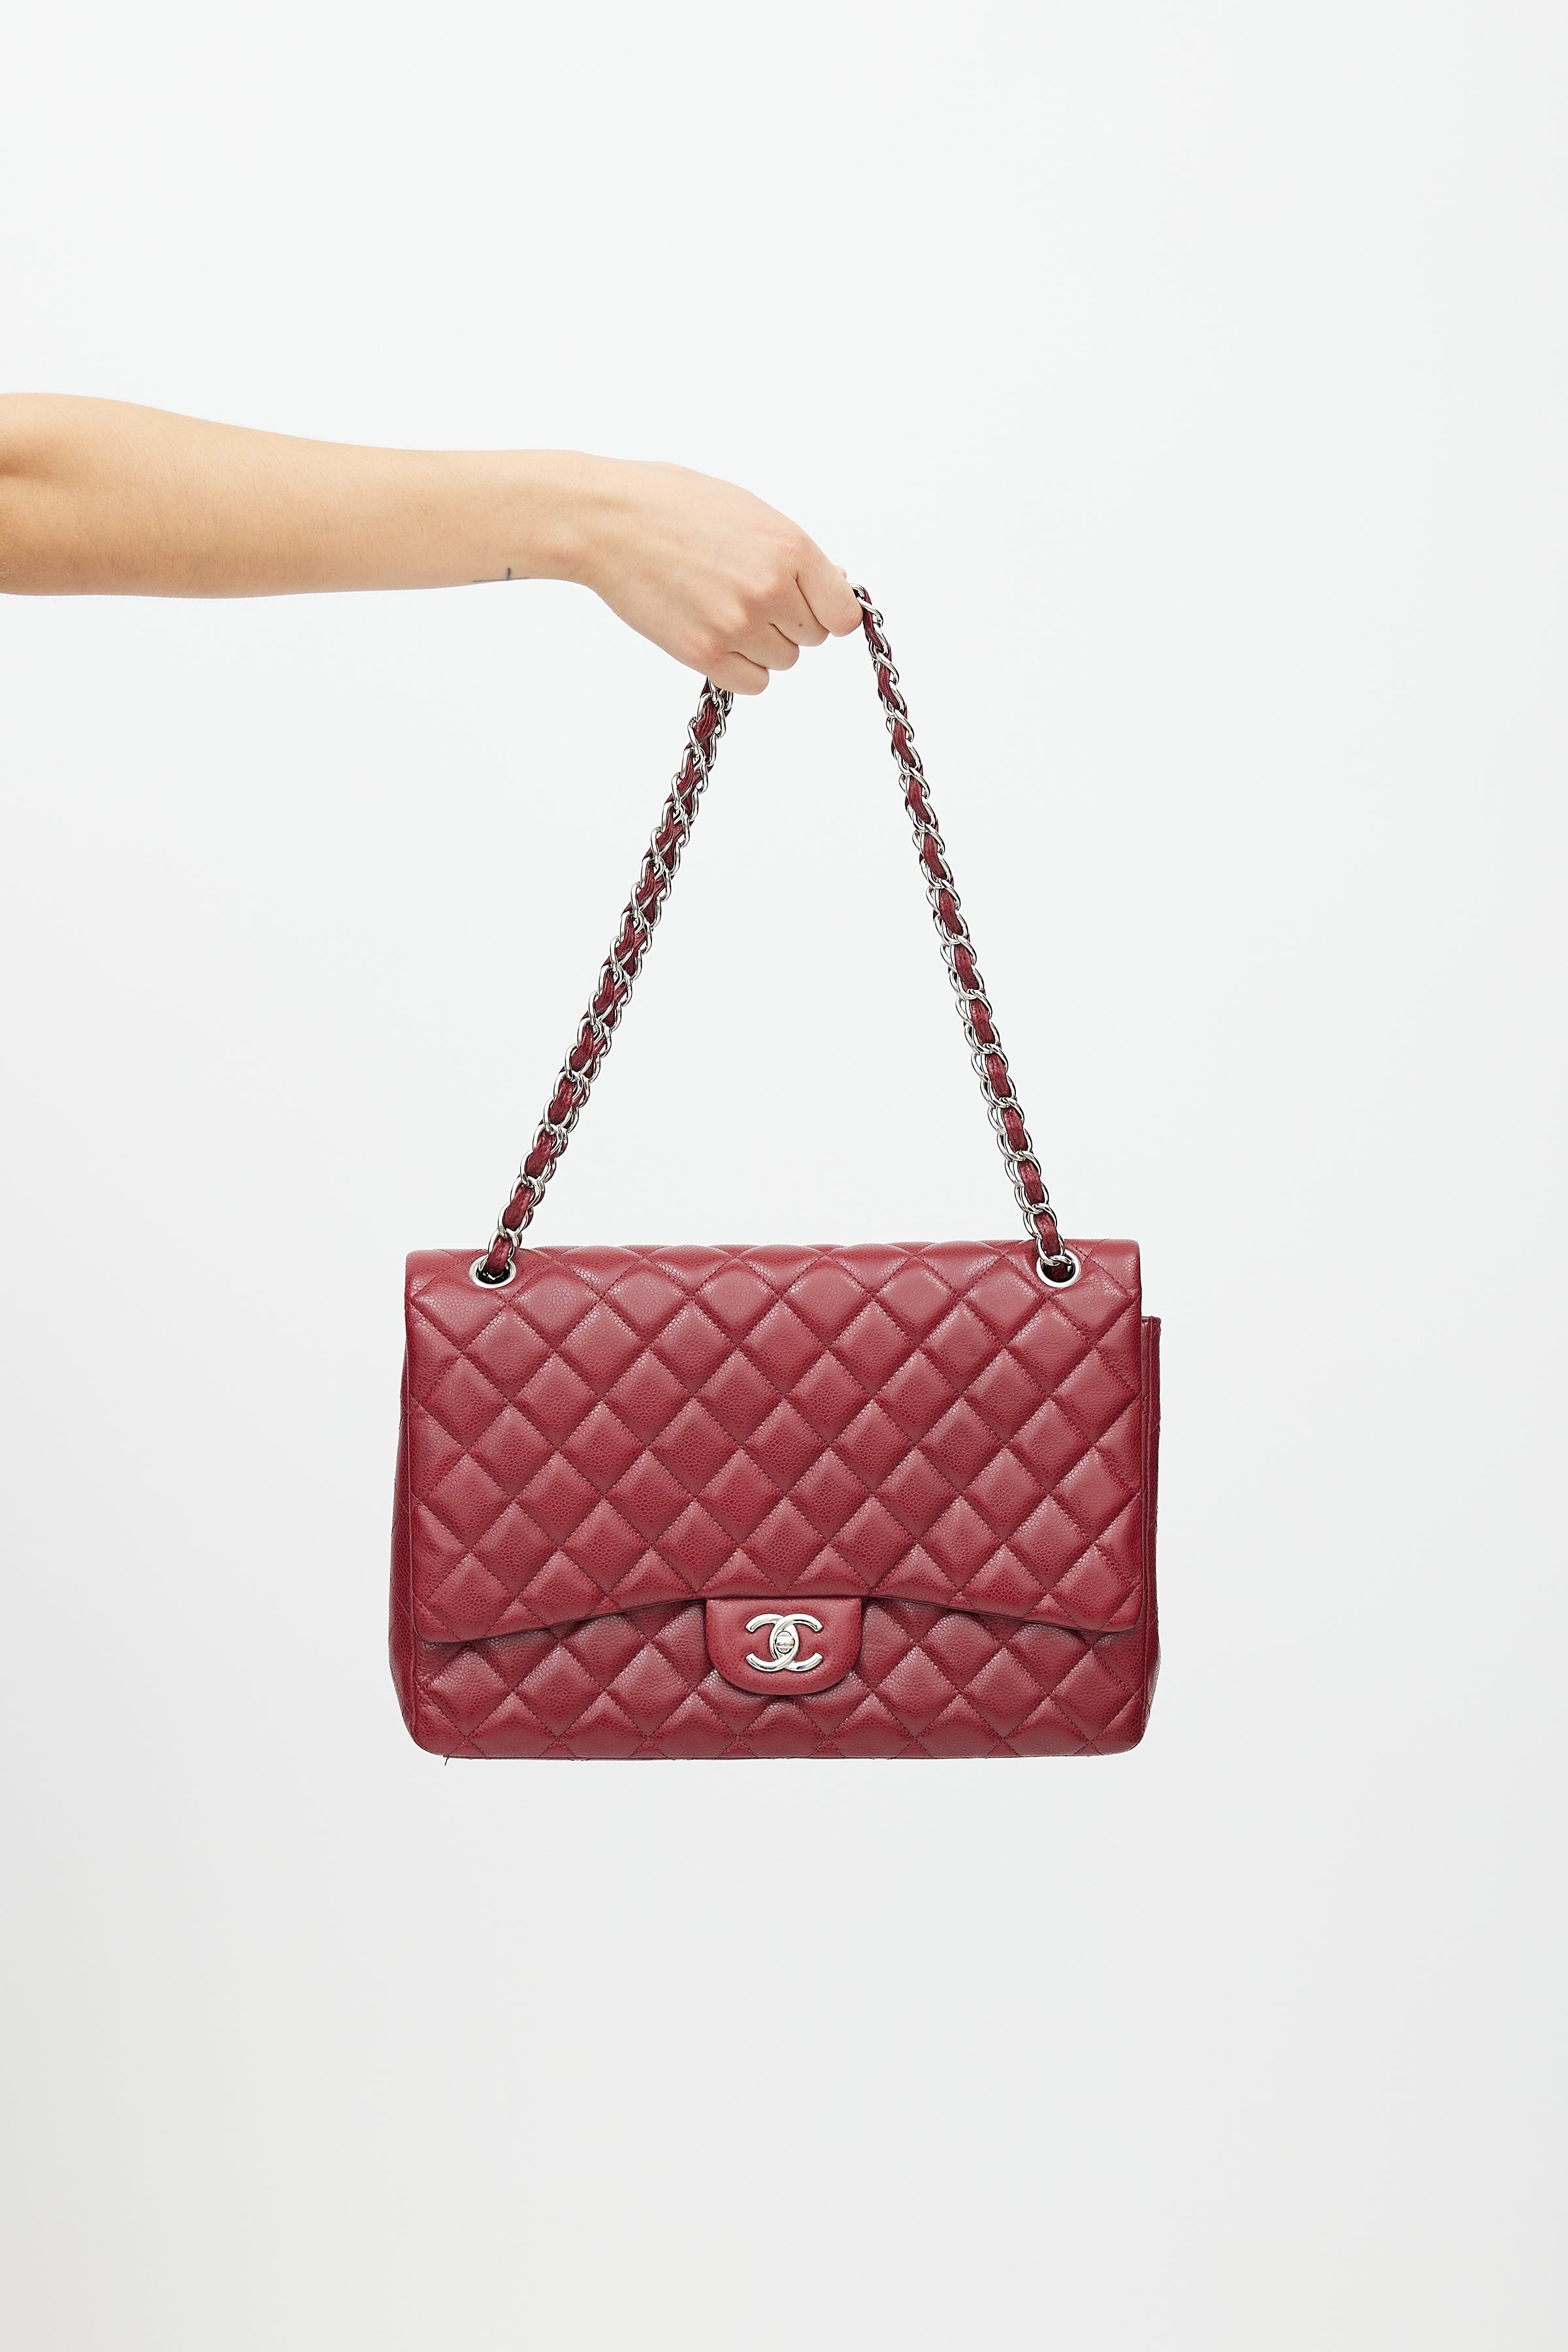 Chanel // 2010 Burgundy Quilted Leather Maxi Flap Bag – VSP Consignment